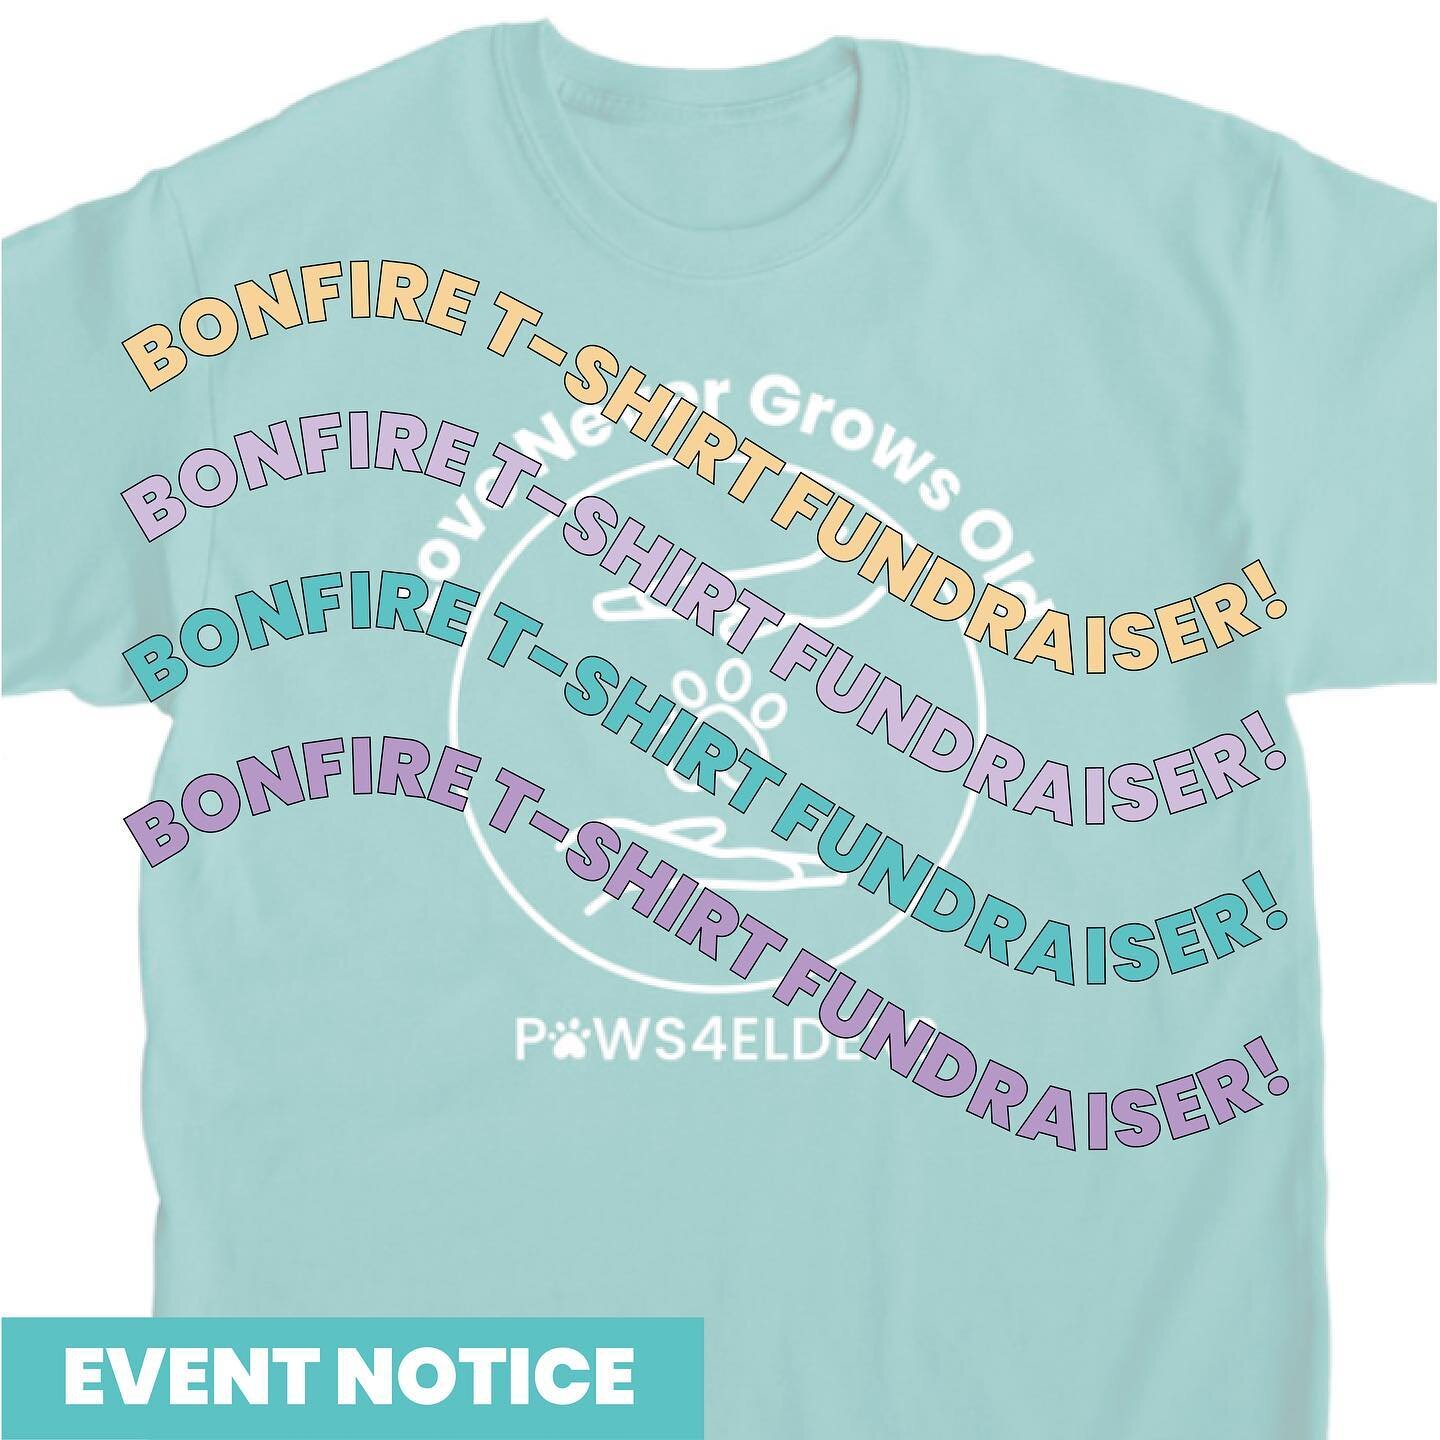 Event Notice: Love Never Grows Old Fundraiser! 💛

Support us by purchasing an awesome t-shirt, sweater, mug, or tote bag on our Bonfire store! 100% will go to program services that impact the lives of seniors and the animals they love. 💜🐶🐱 #paws4